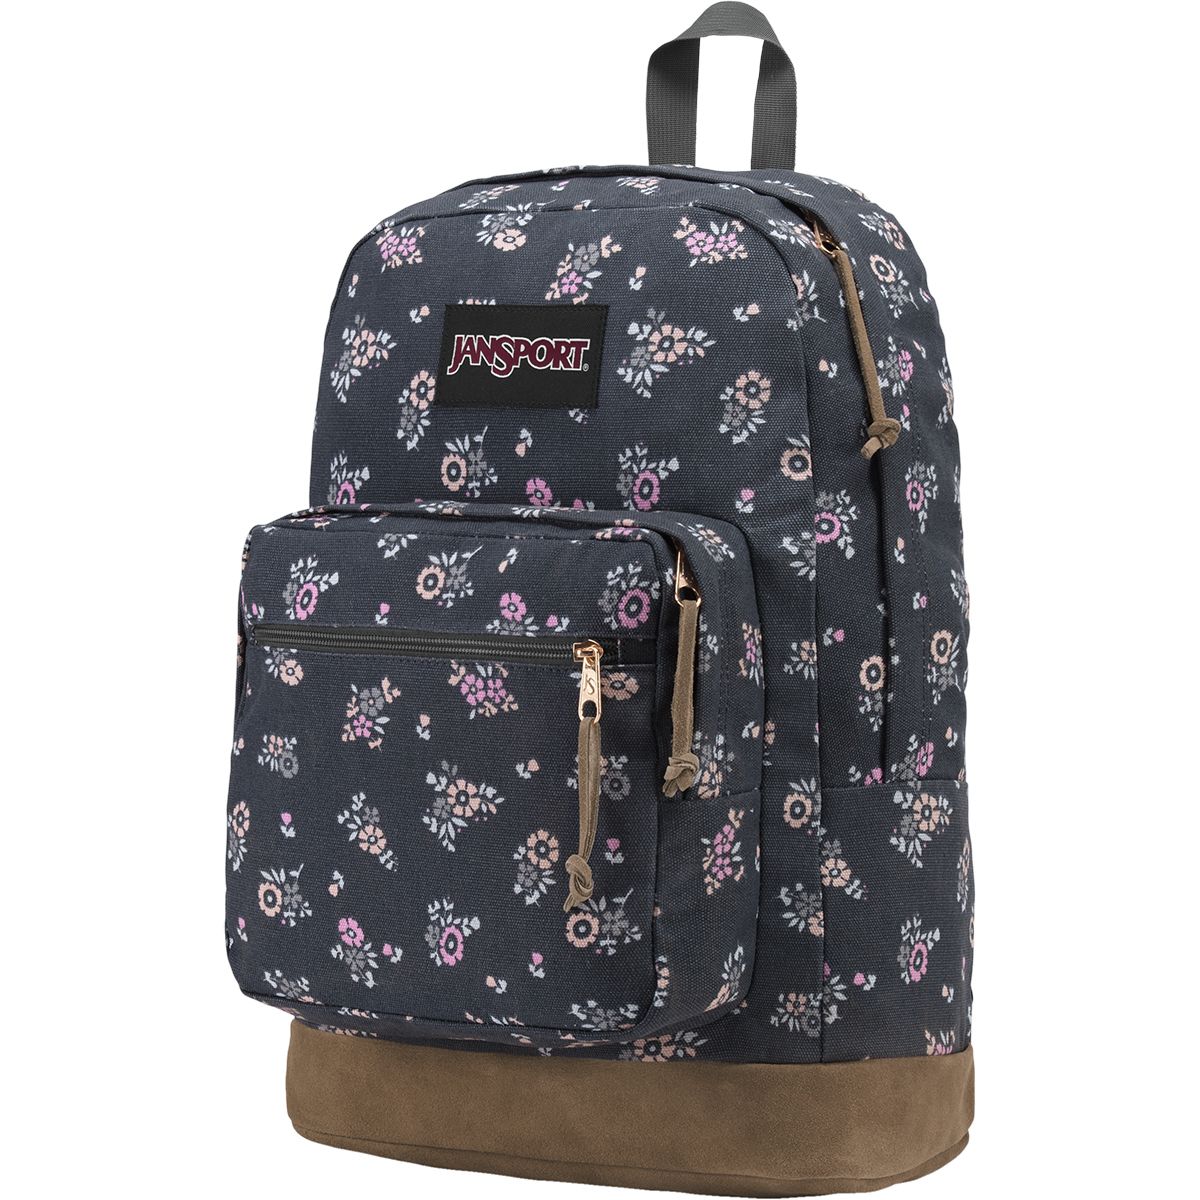 JanSport Right Pack Expressions 31L Backpack | Backcountry.com